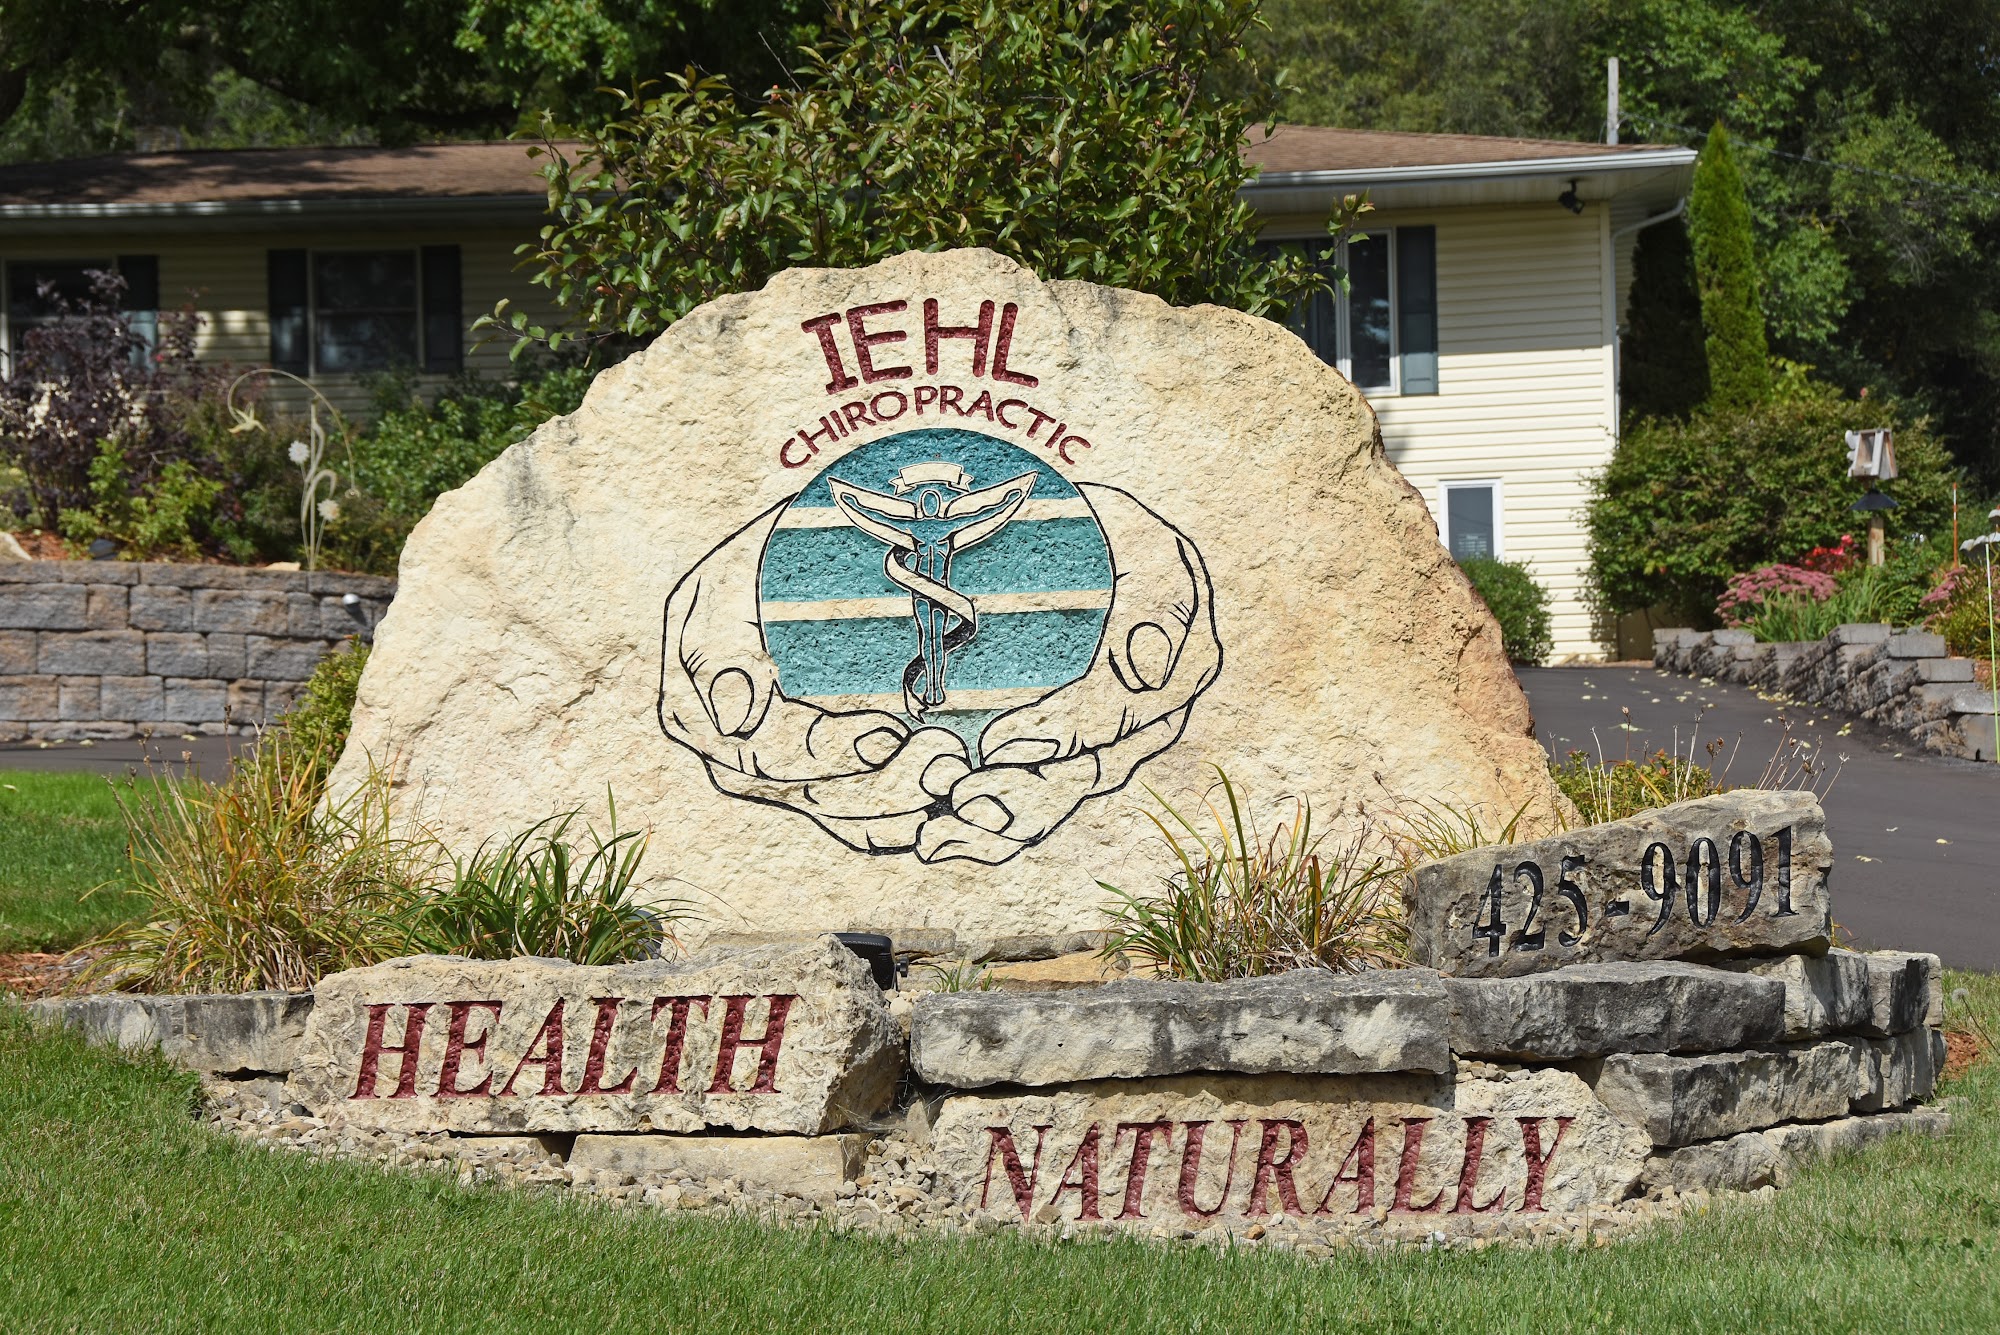 Iehl Chiropractic W9330 WI-29, River Falls Wisconsin 54022